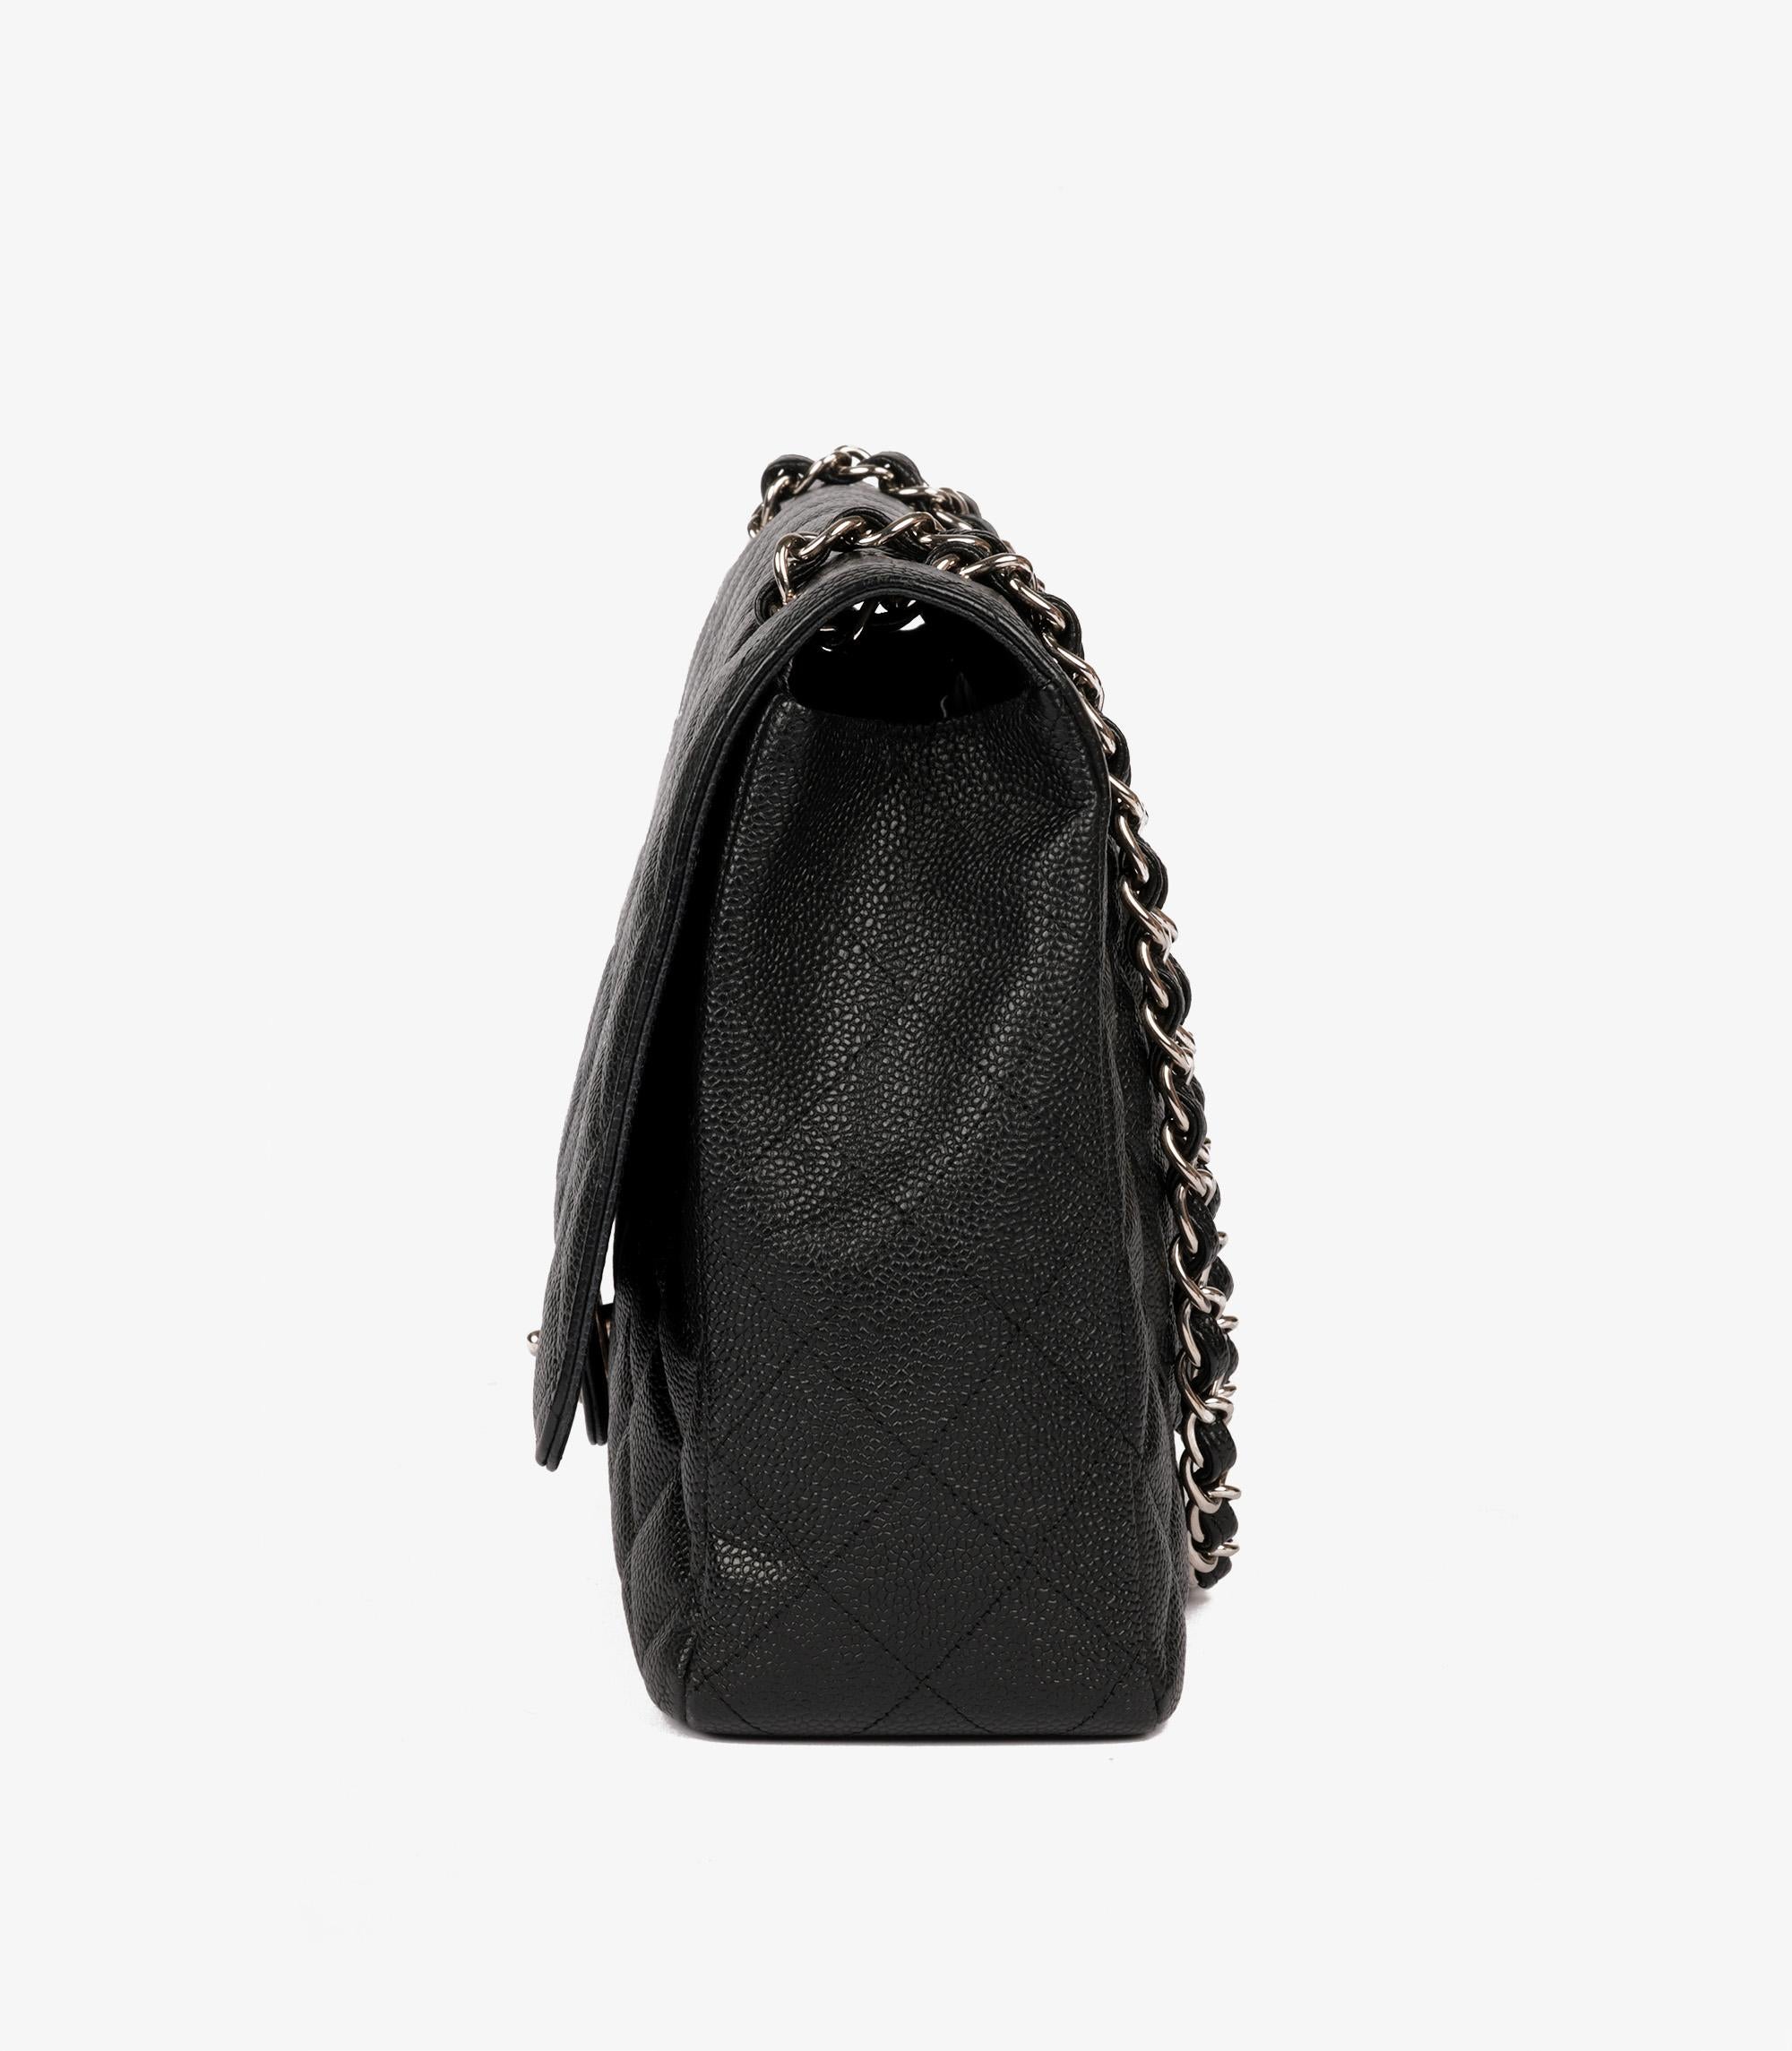 Chanel Black Quilted Caviar Leather Maxi Classic Single Flap Bag For Sale 1